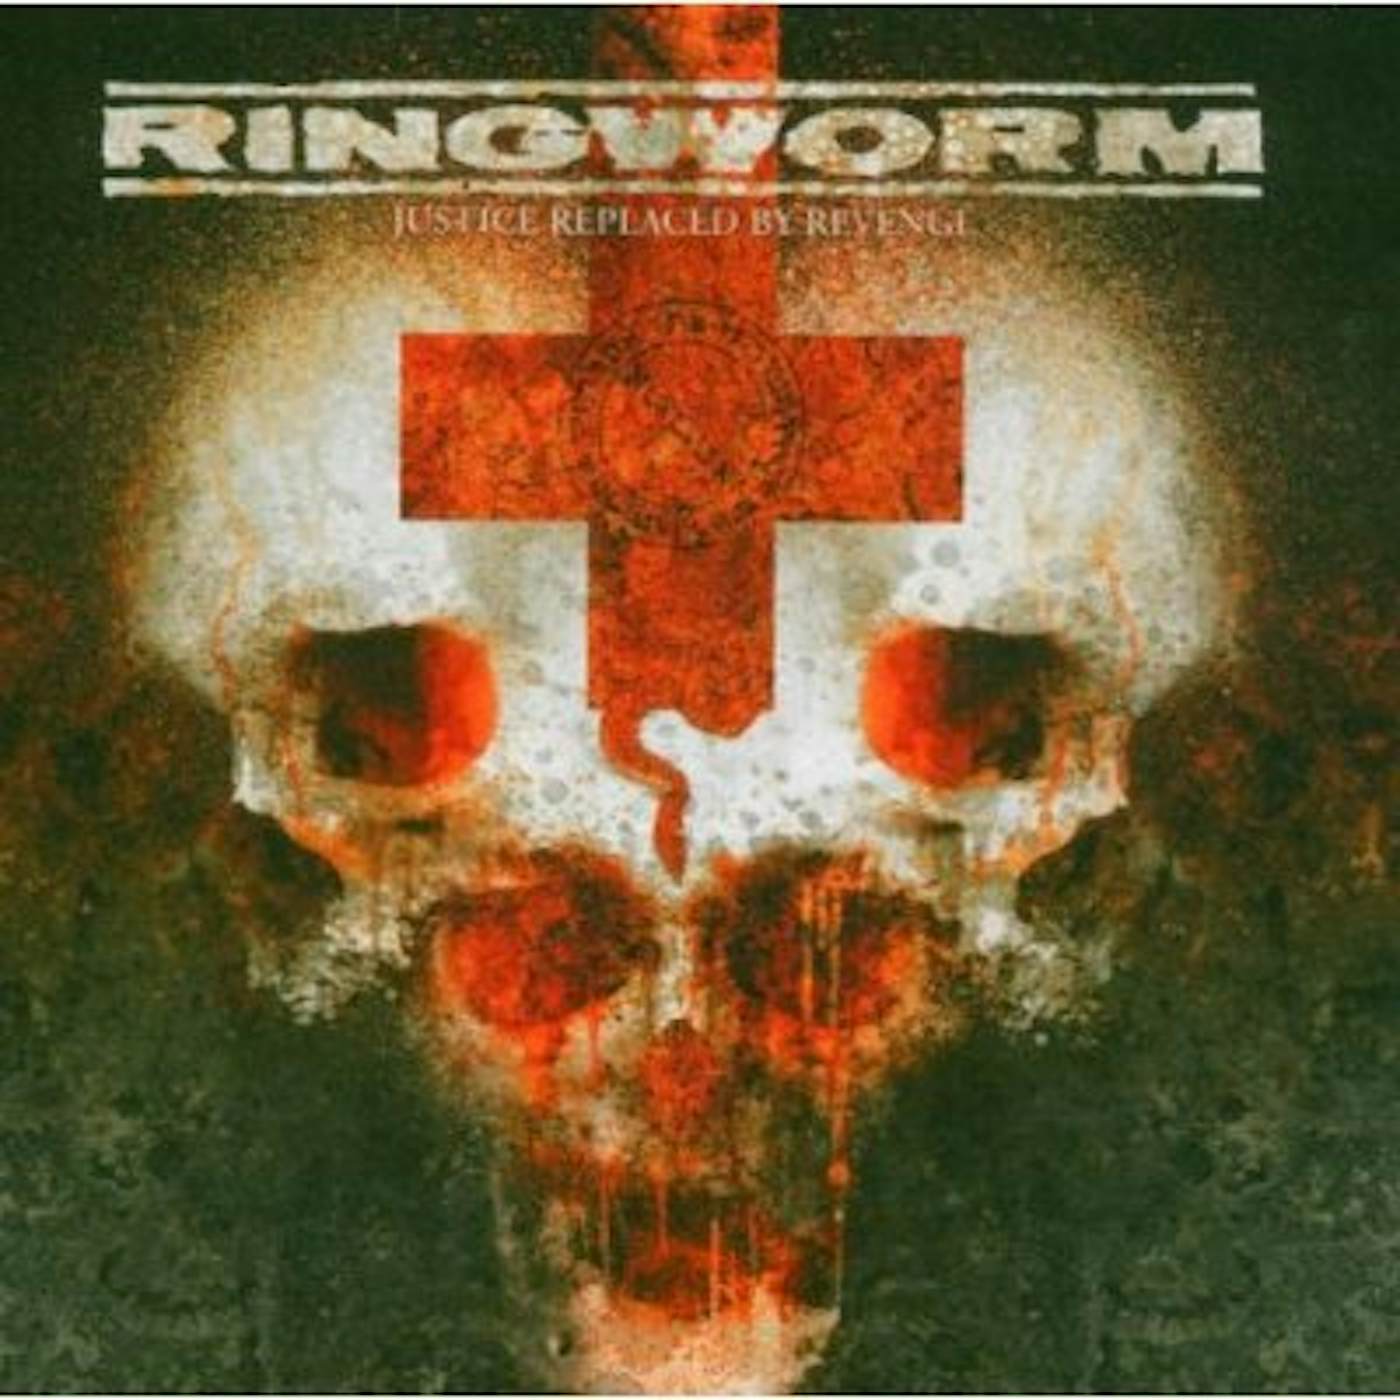 Ringworm JUSTICE REPLACED BY REVENGE CD